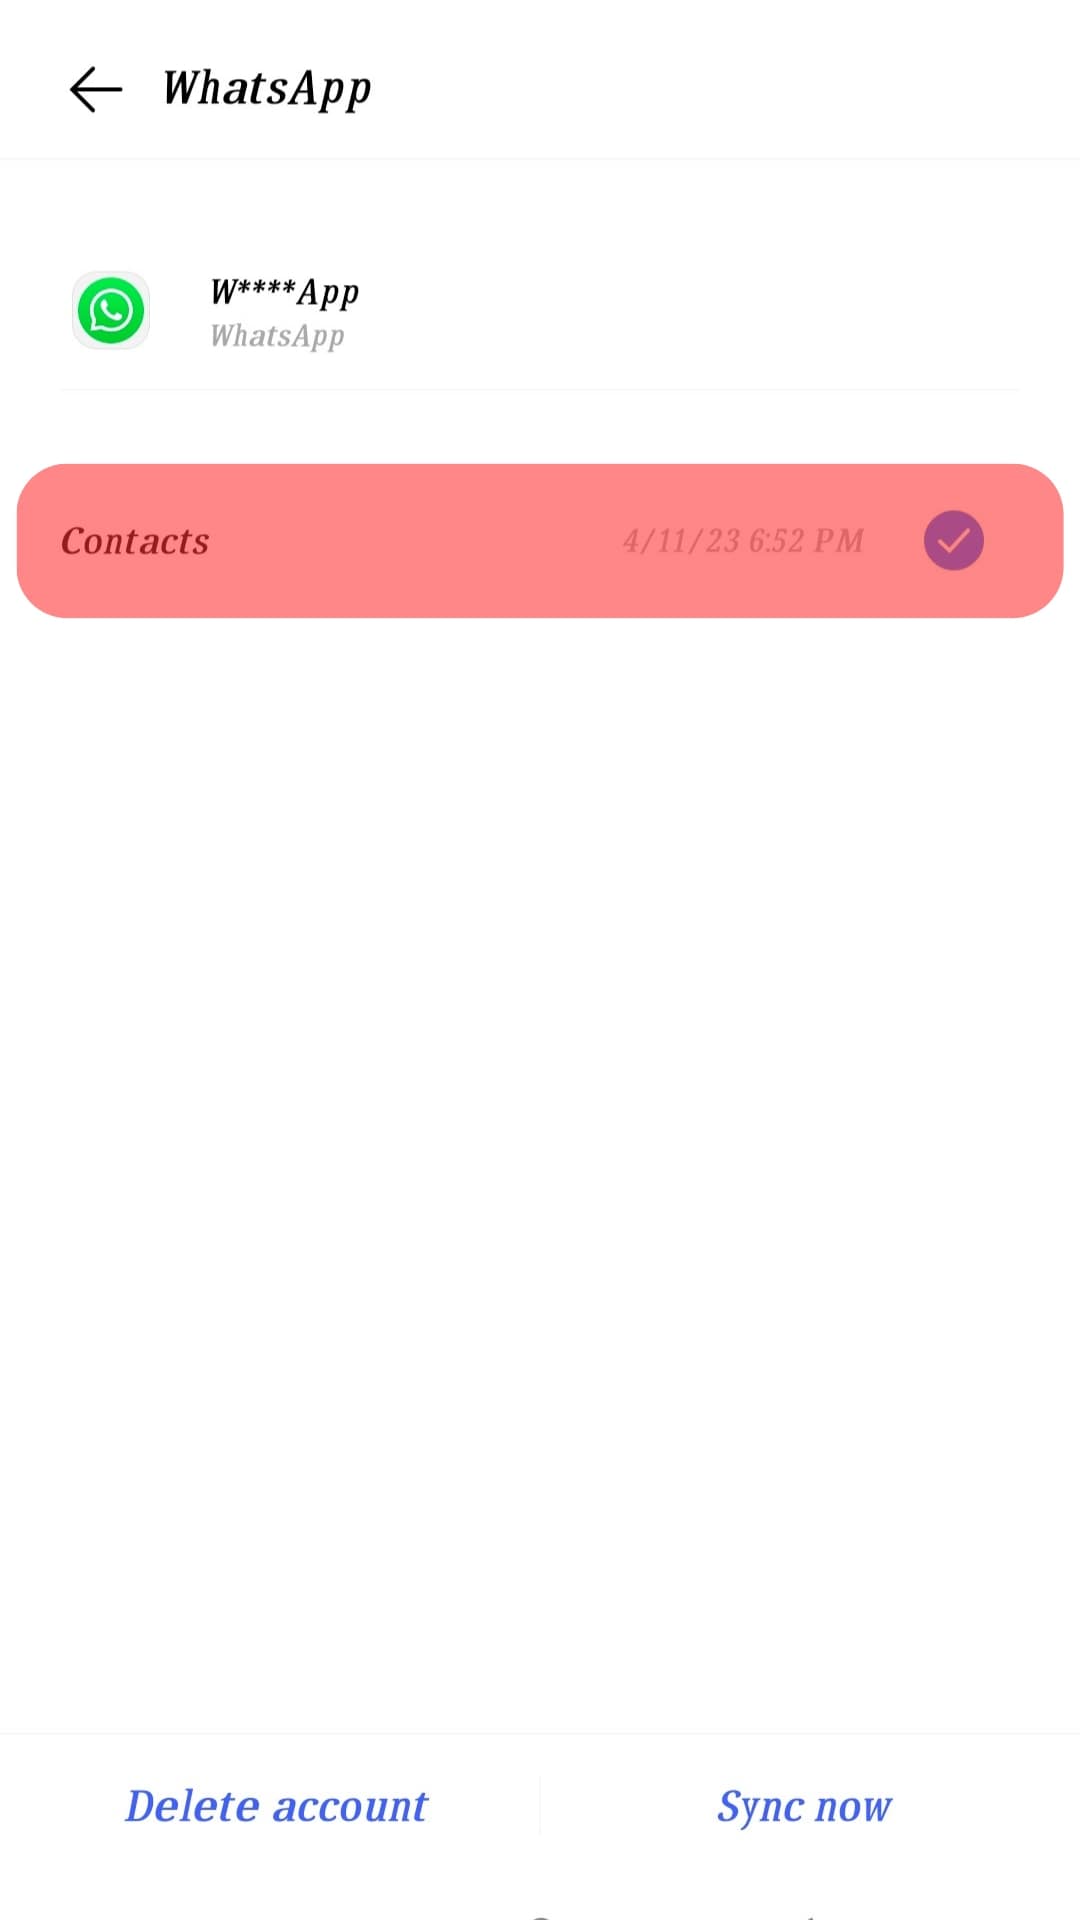 Enable The Contacts Option